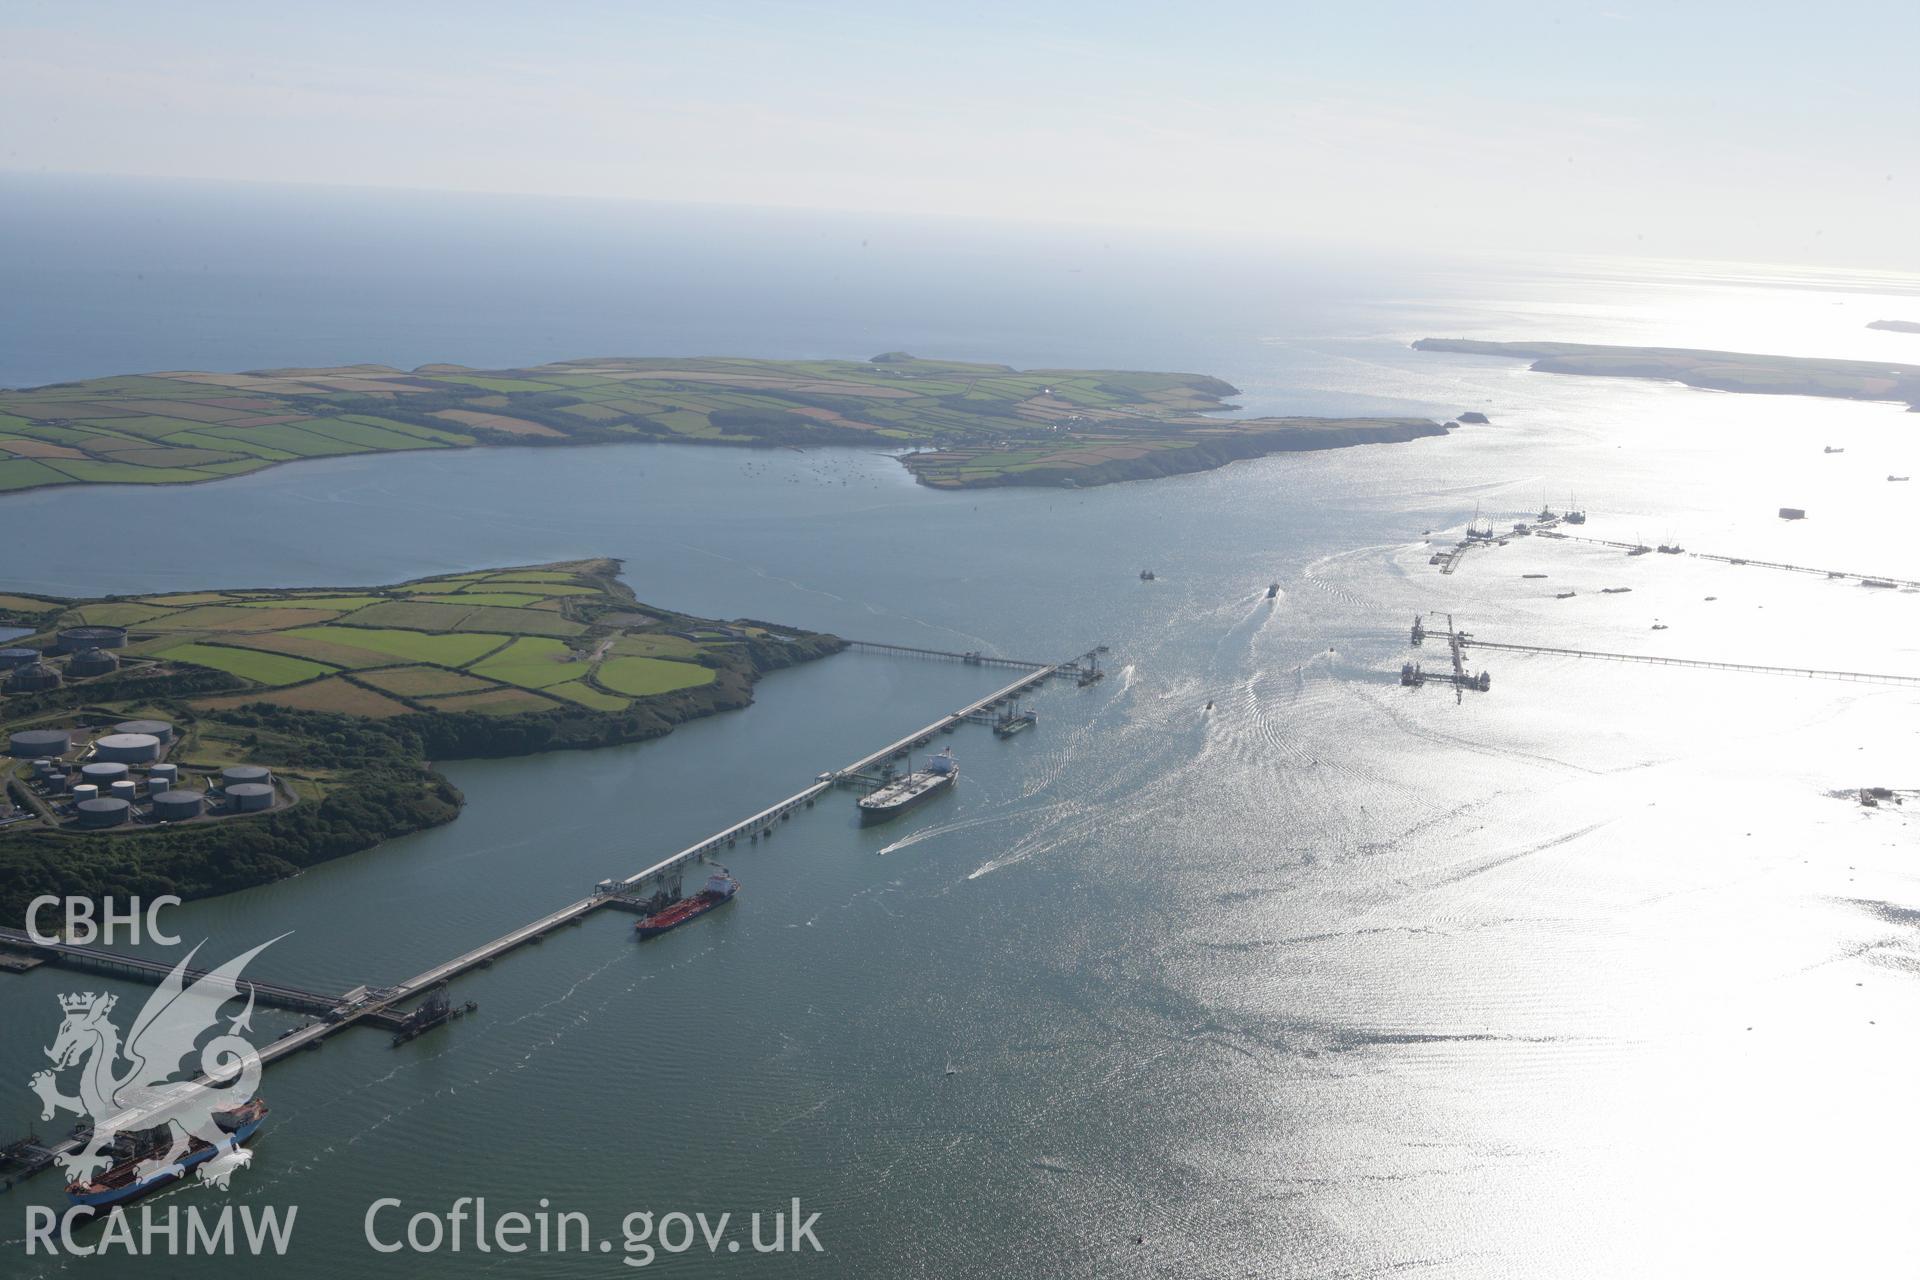 RCAHMW colour oblique aerial photograph of Milford Haven Waterway, looking to the west. Taken on 30 July 2007 by Toby Driver